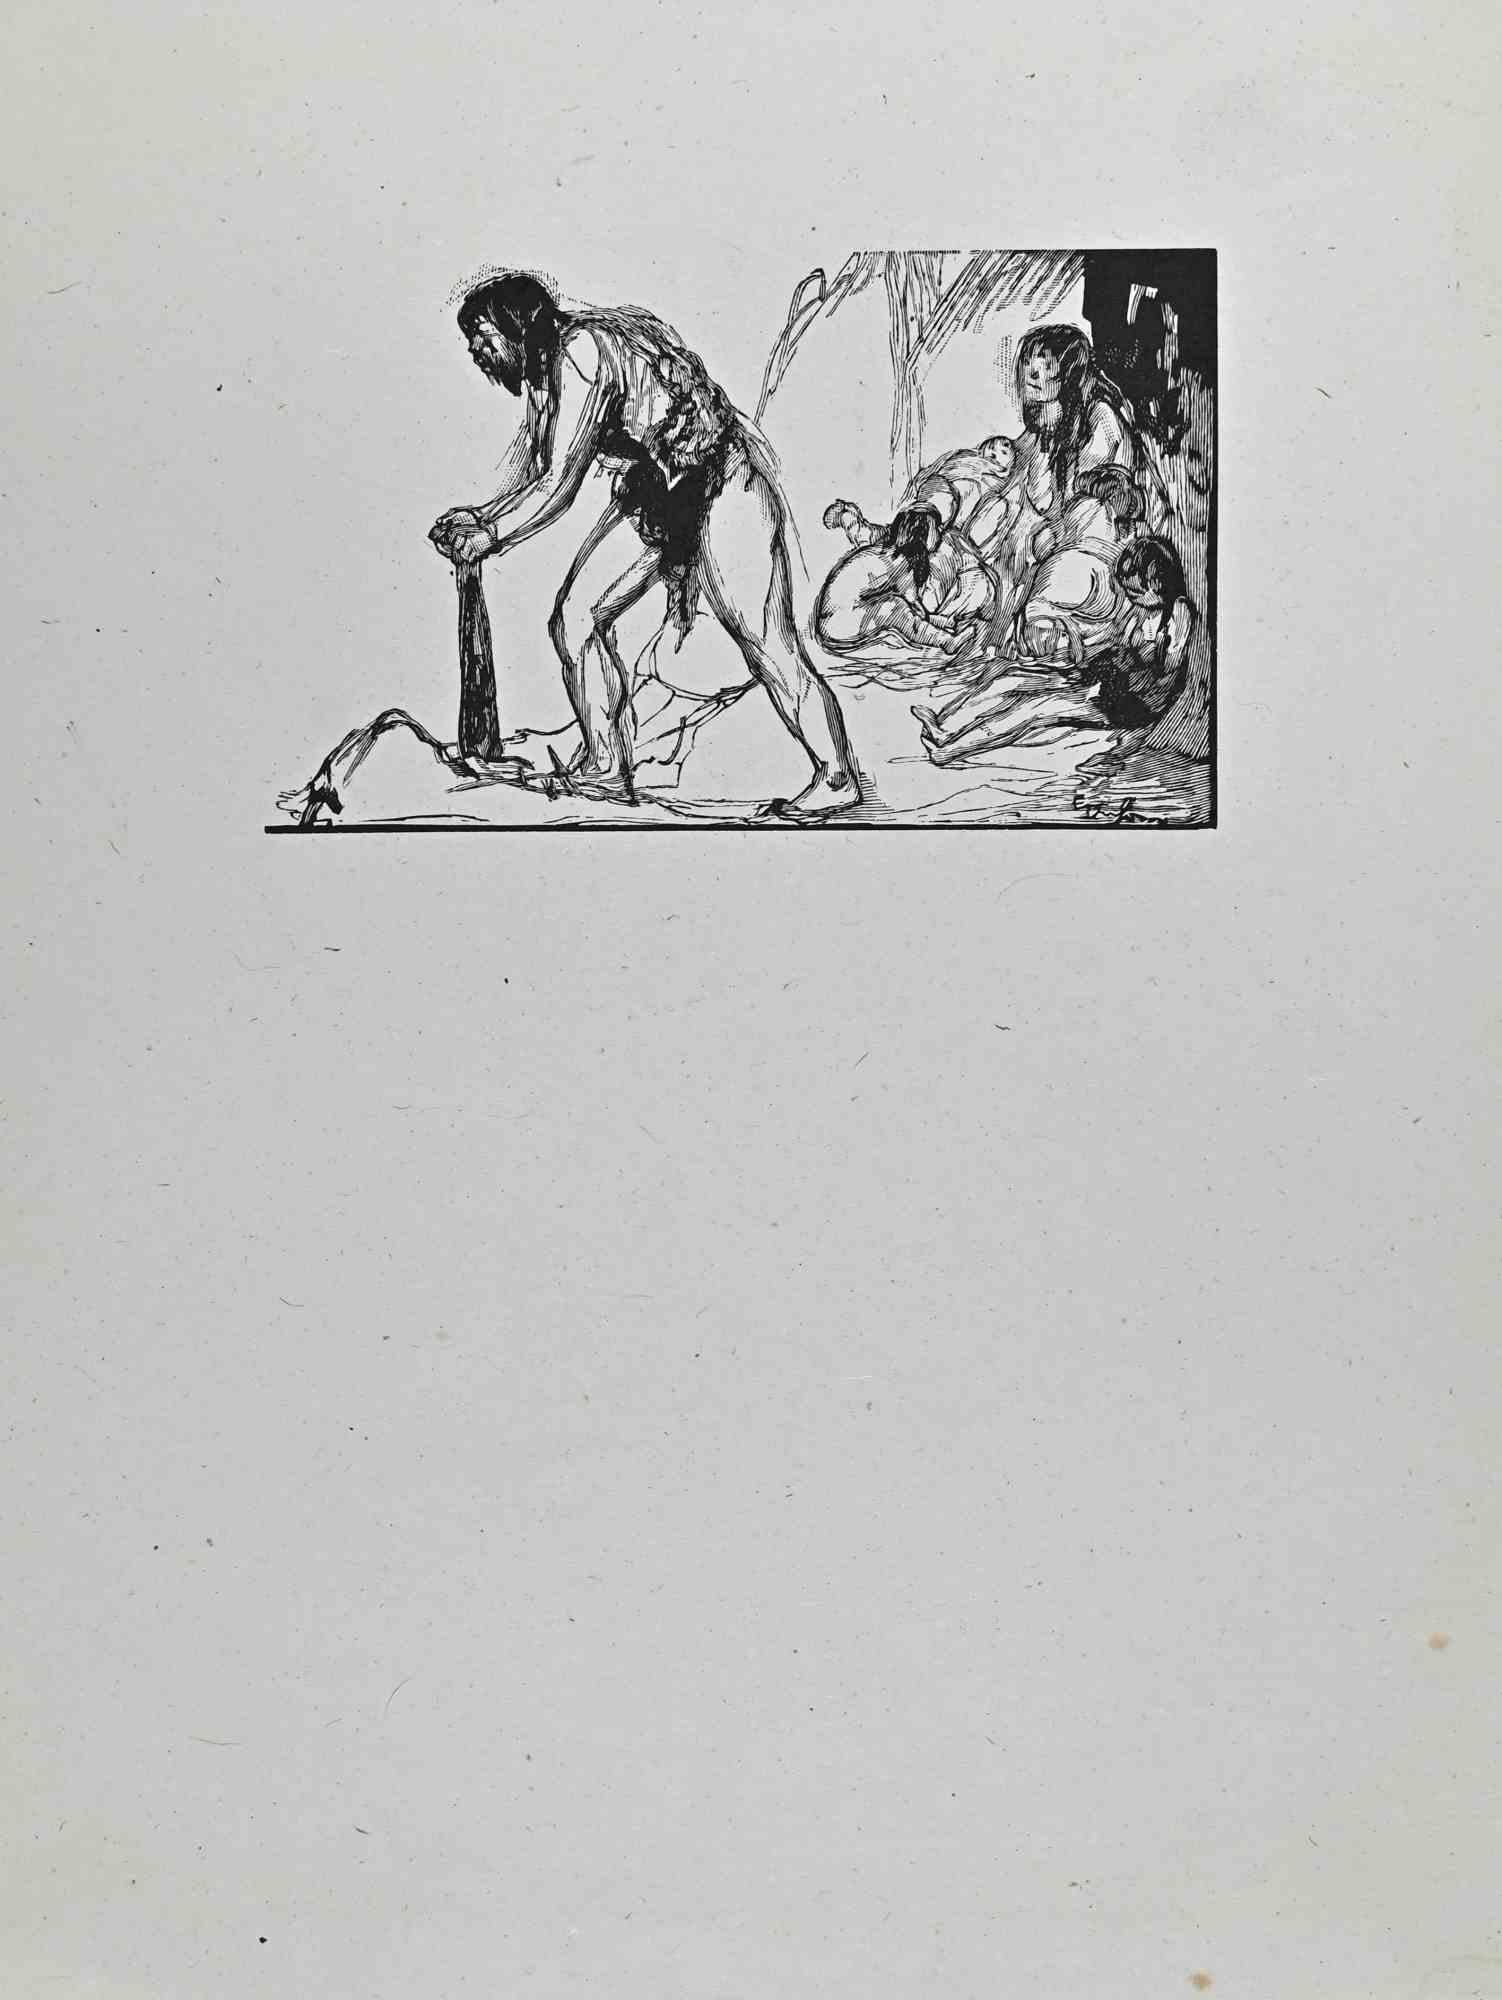 The Primitive Family is a woodcut print on ivory-colored paper realized by Paul Baudier (1881-1962) in the 1930s.

Good conditions except for small spots.

Paul Baudier, (born October 18, 1881 in Paris and died December 9, 1962 in Châtillon), was a